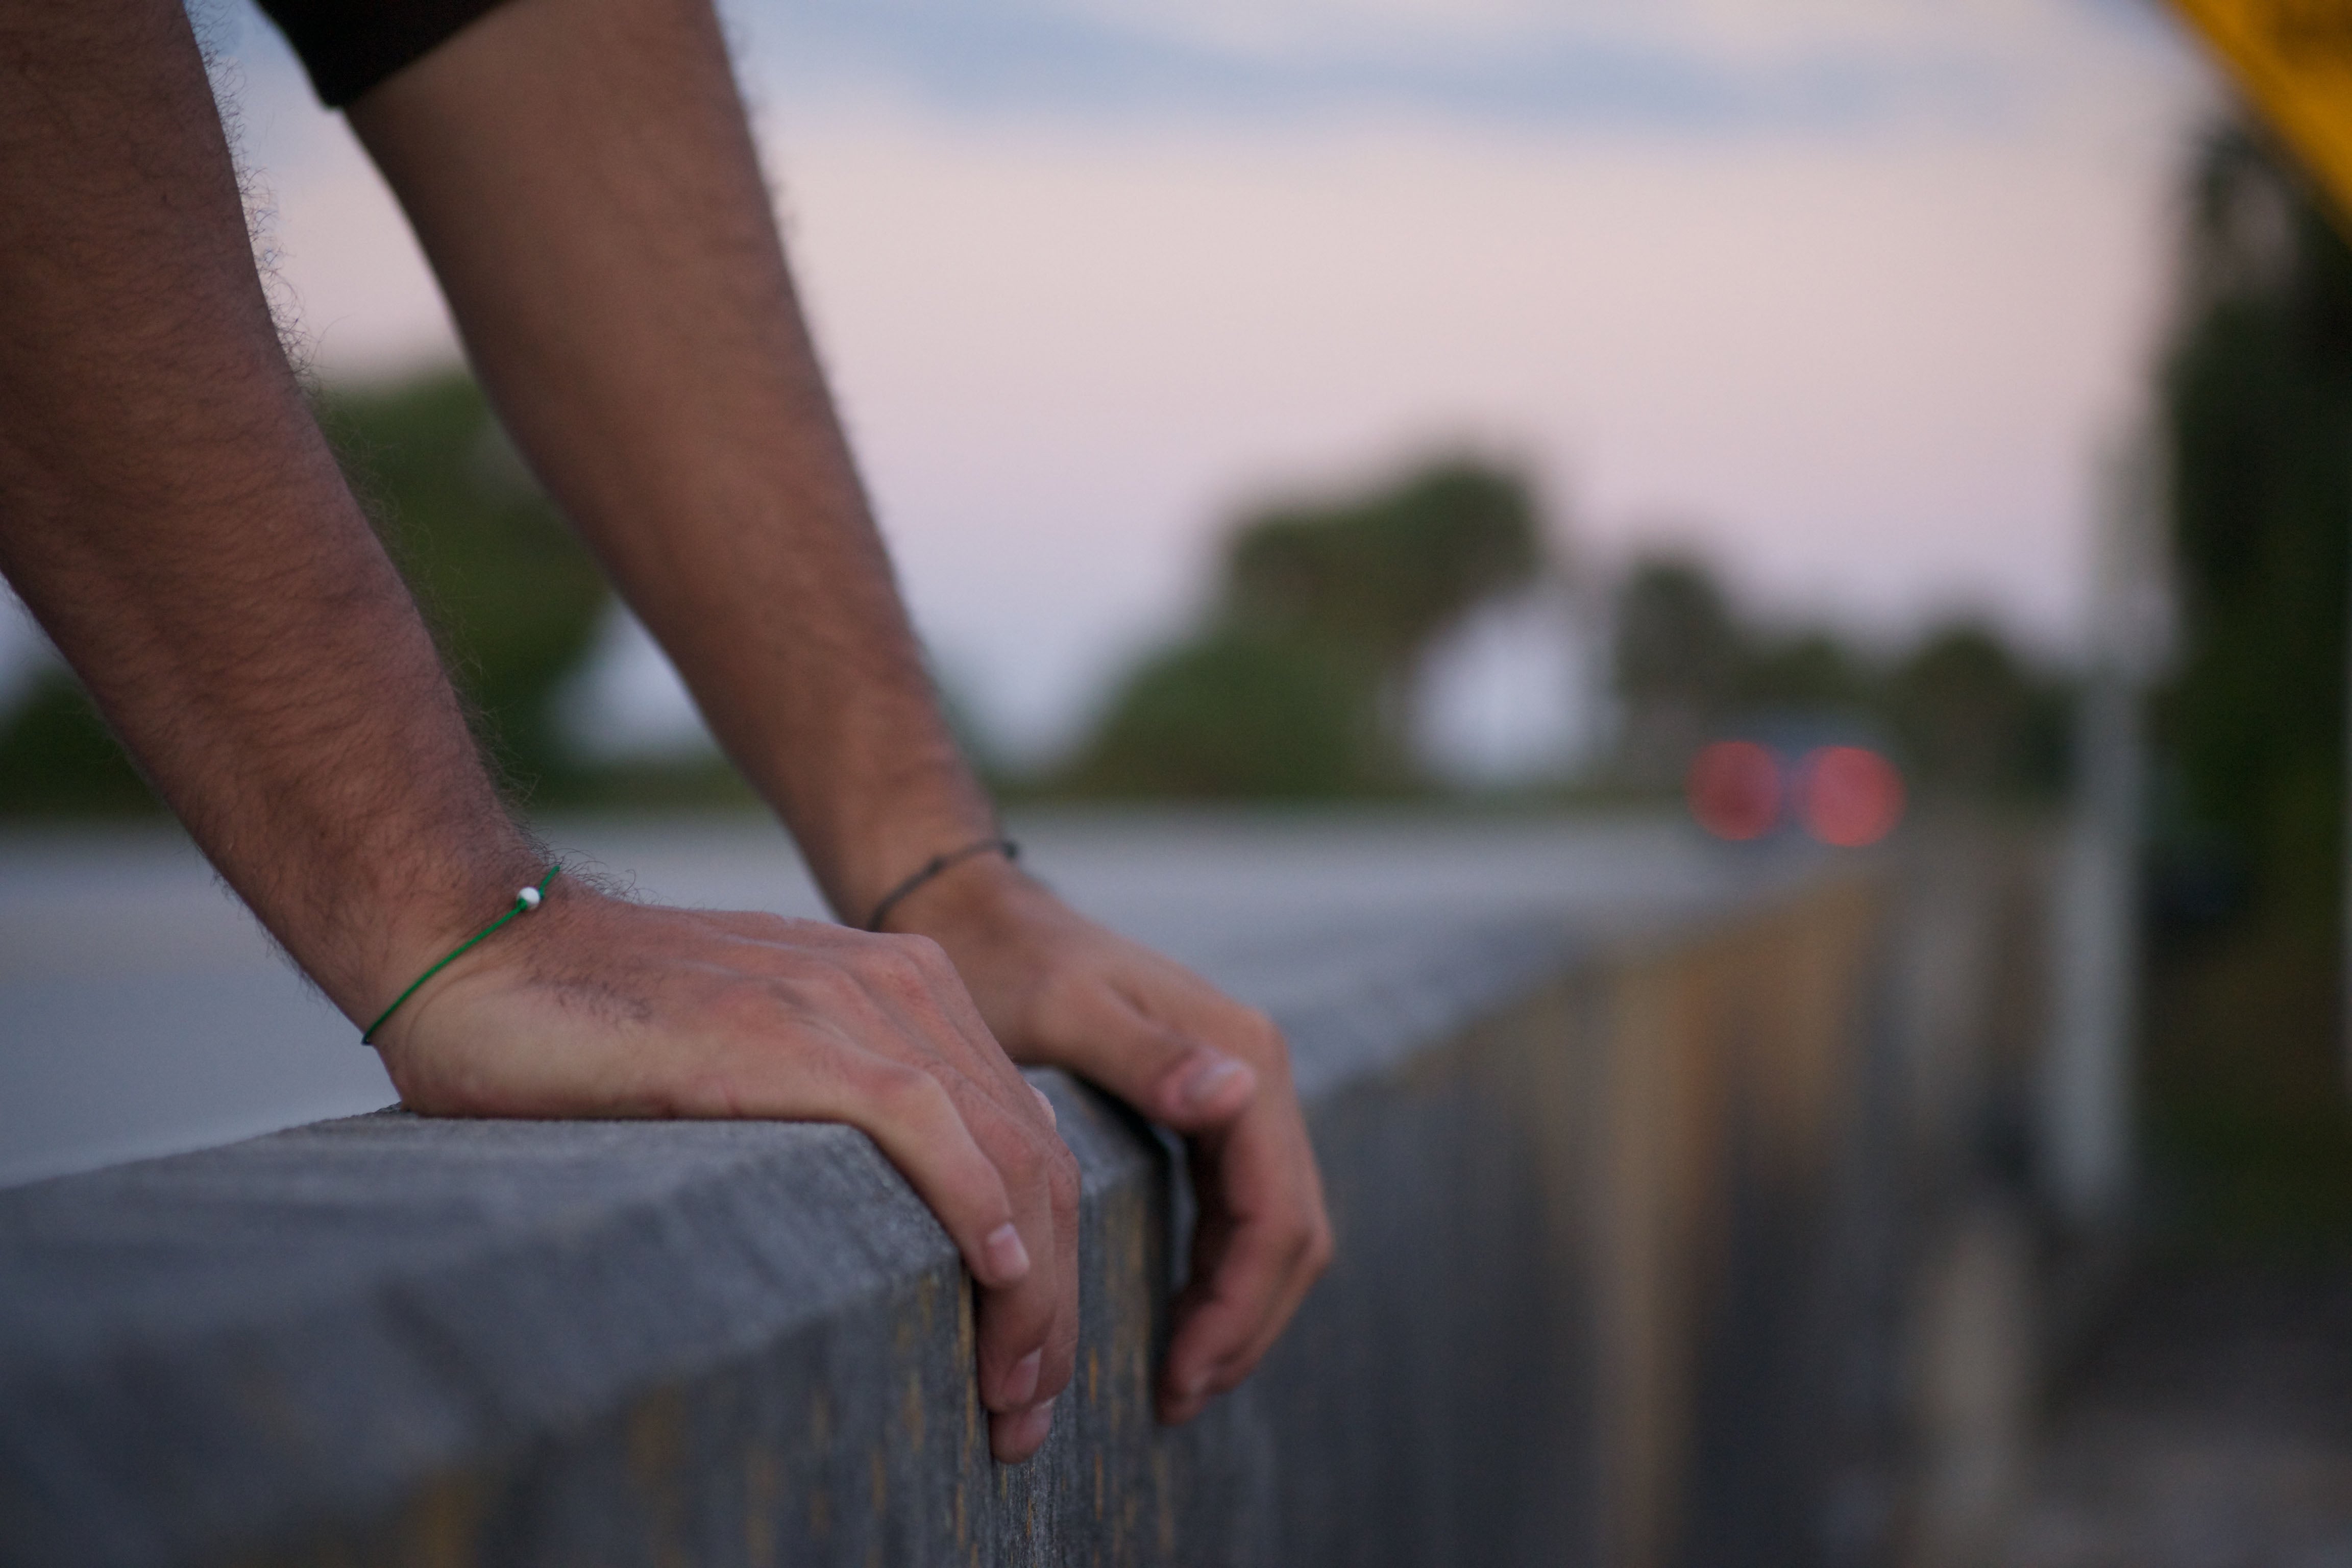 Modeled Love Hope Friendship Bracelet with, blurred, scenic background of a road